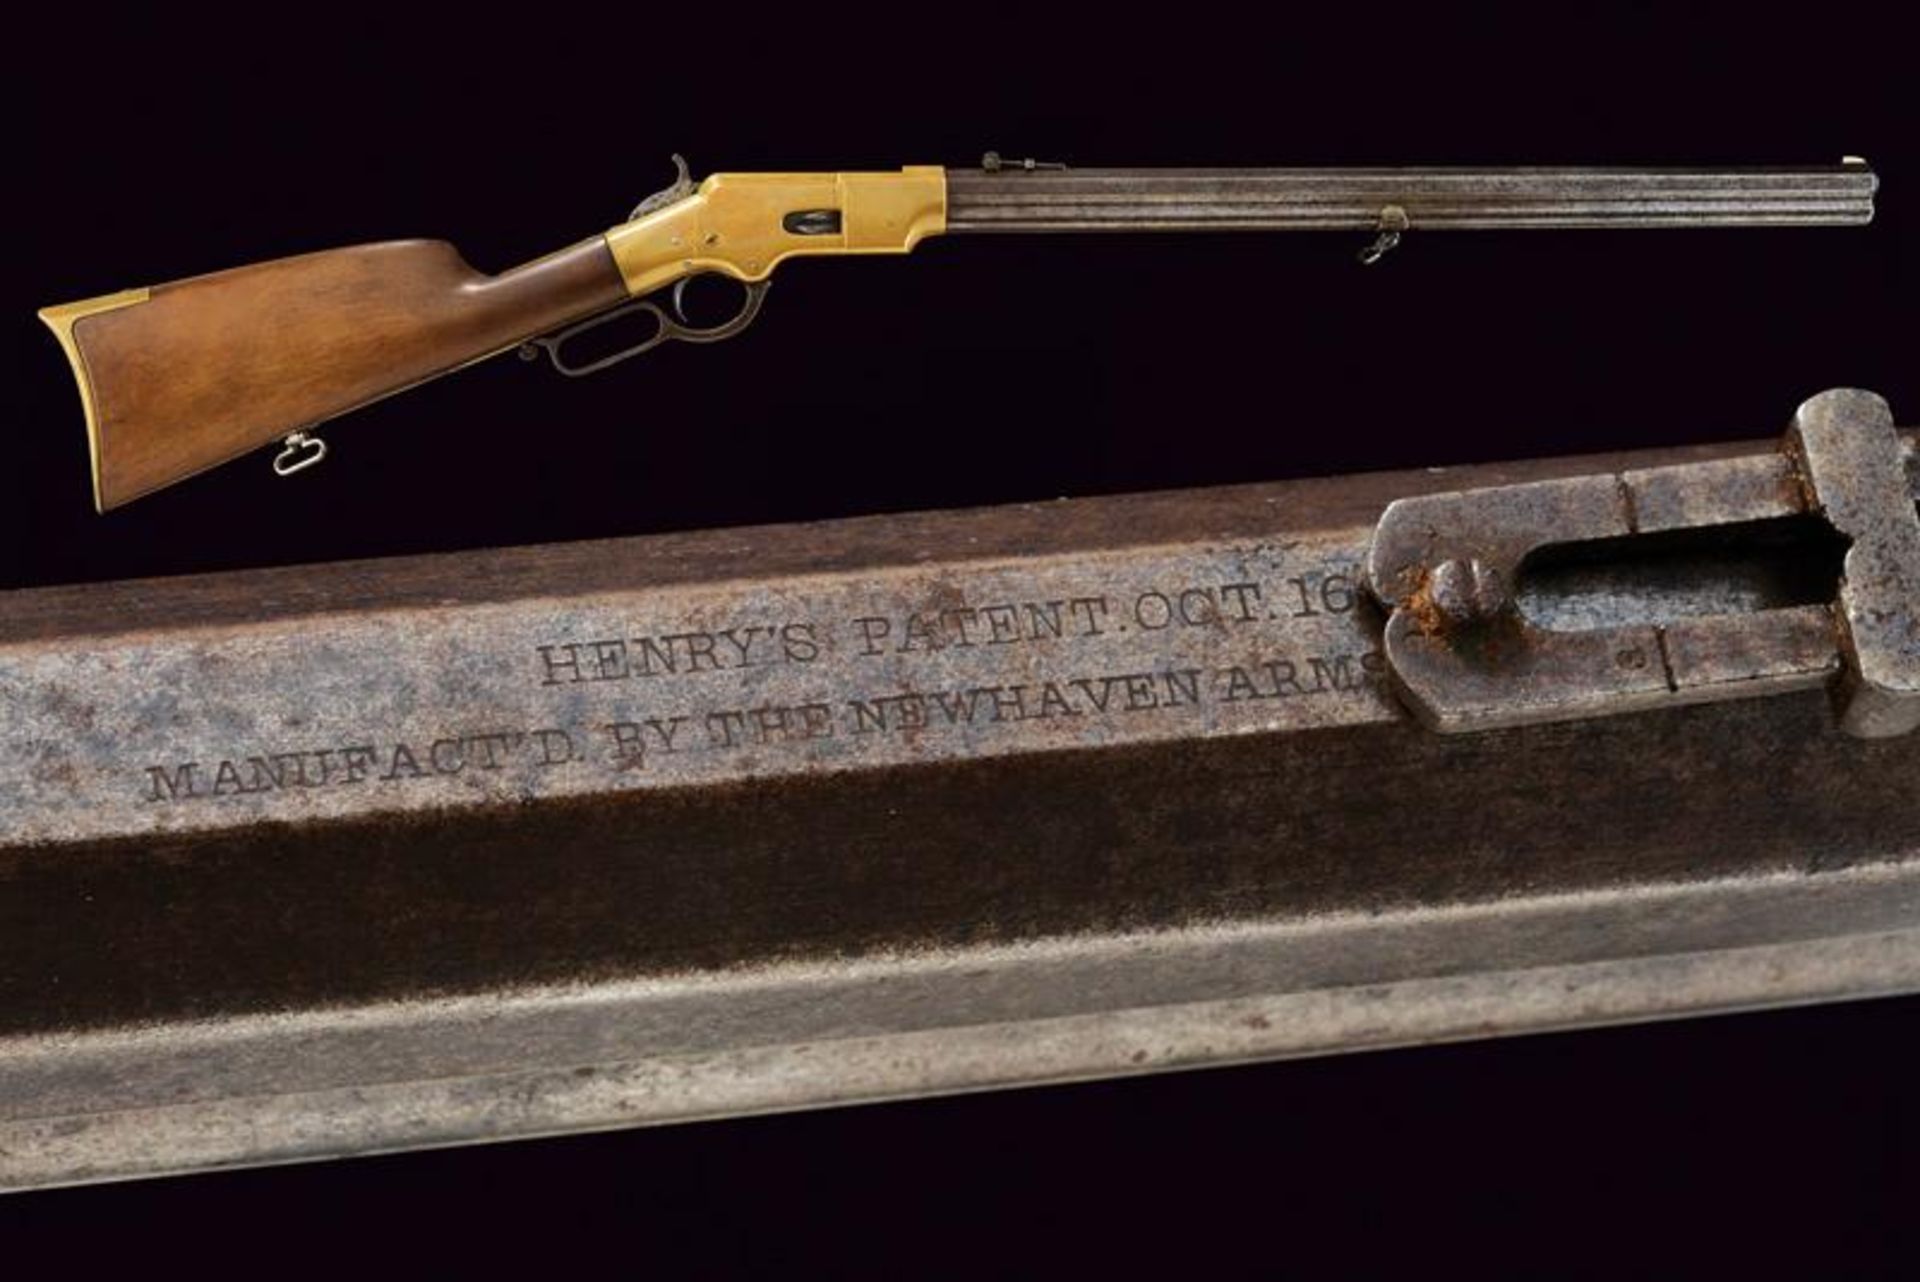 A rare and interesting transitional Henry rifle